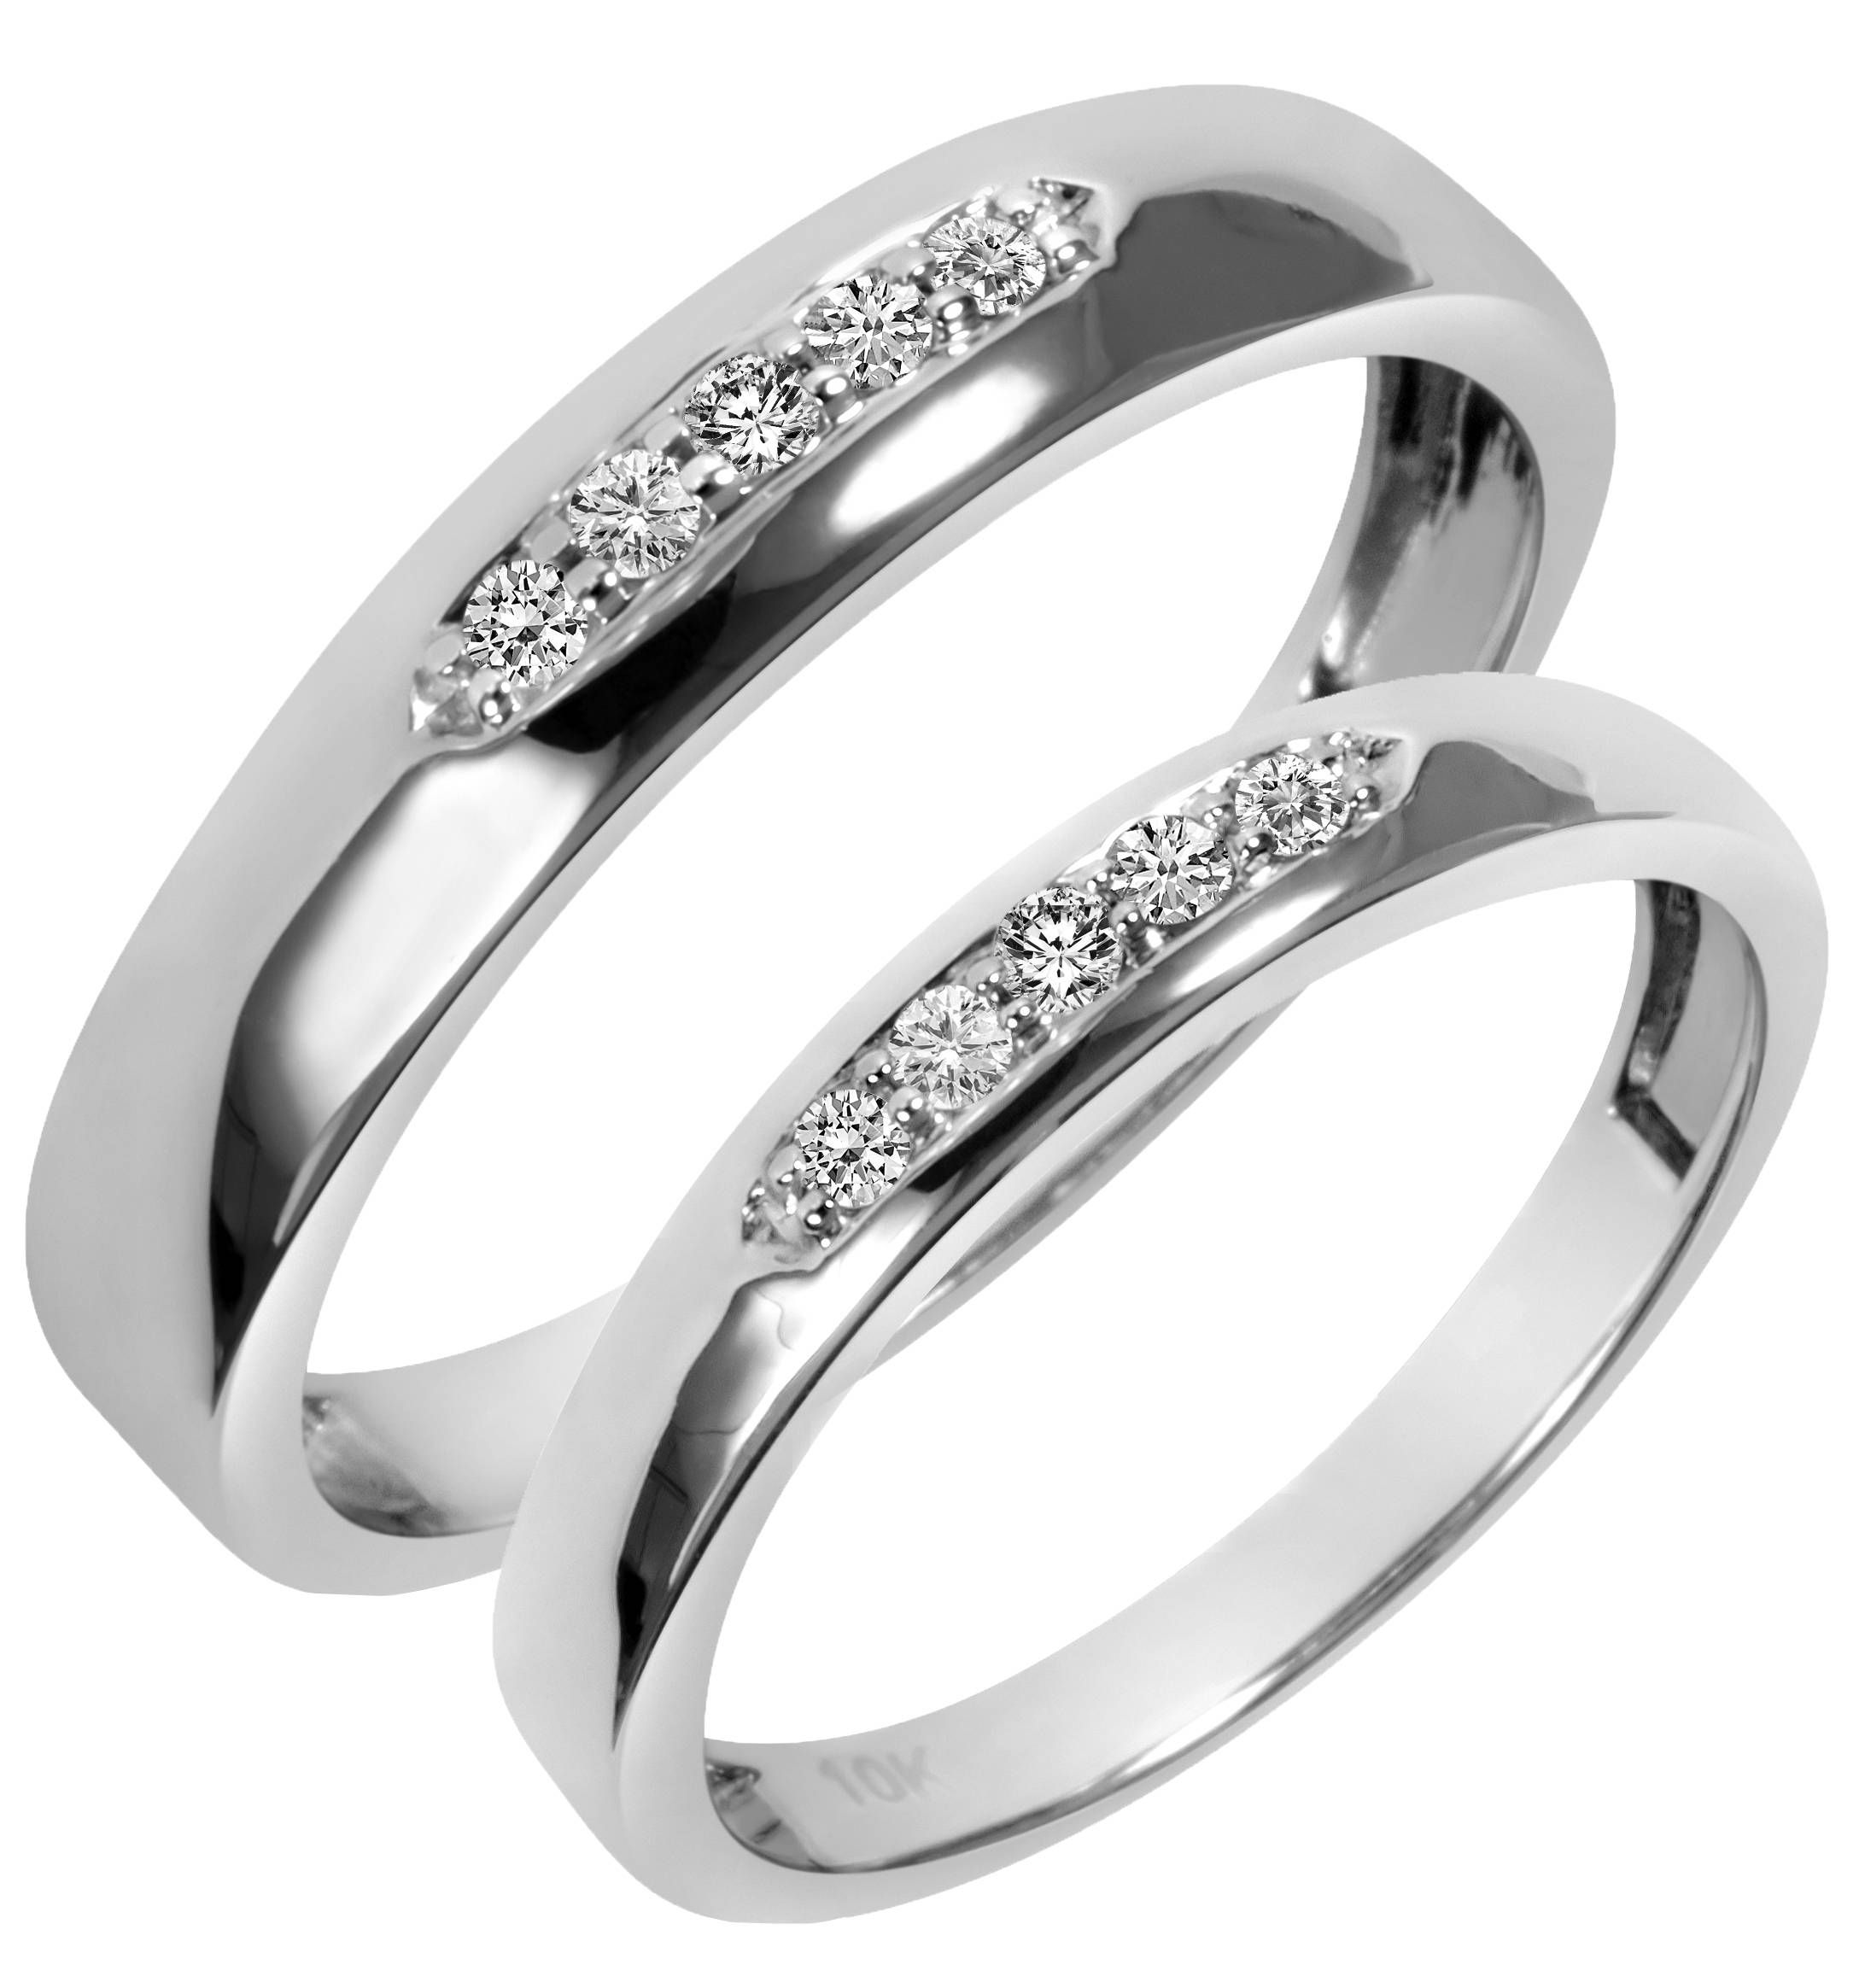 1/5 Carat T.w. Diamond His And Hers Wedding Band Set 14k White Gold In His And Her Wedding Bands Sets (Photo 31 of 339)